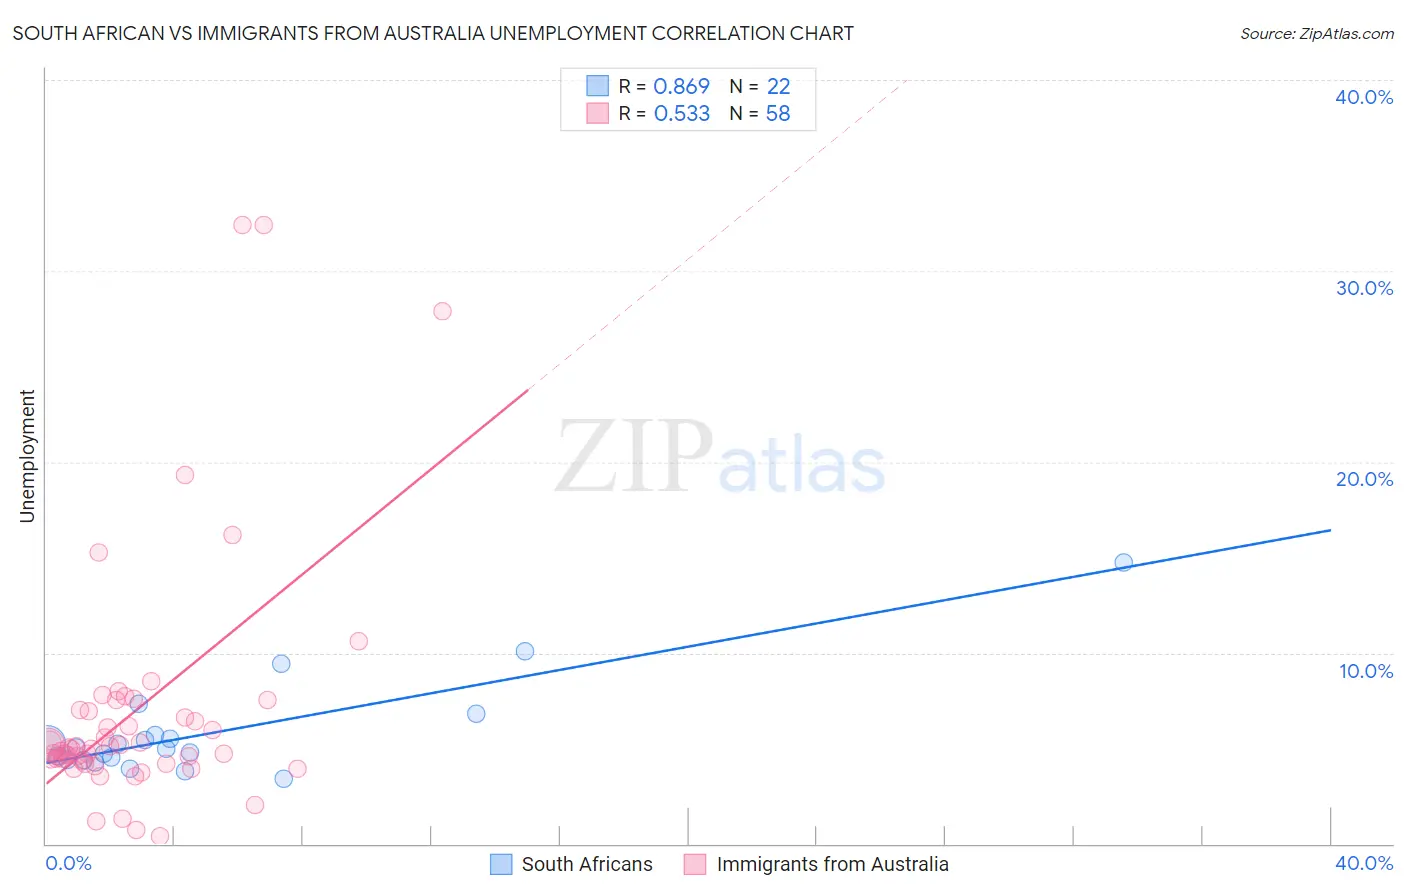 South African vs Immigrants from Australia Unemployment